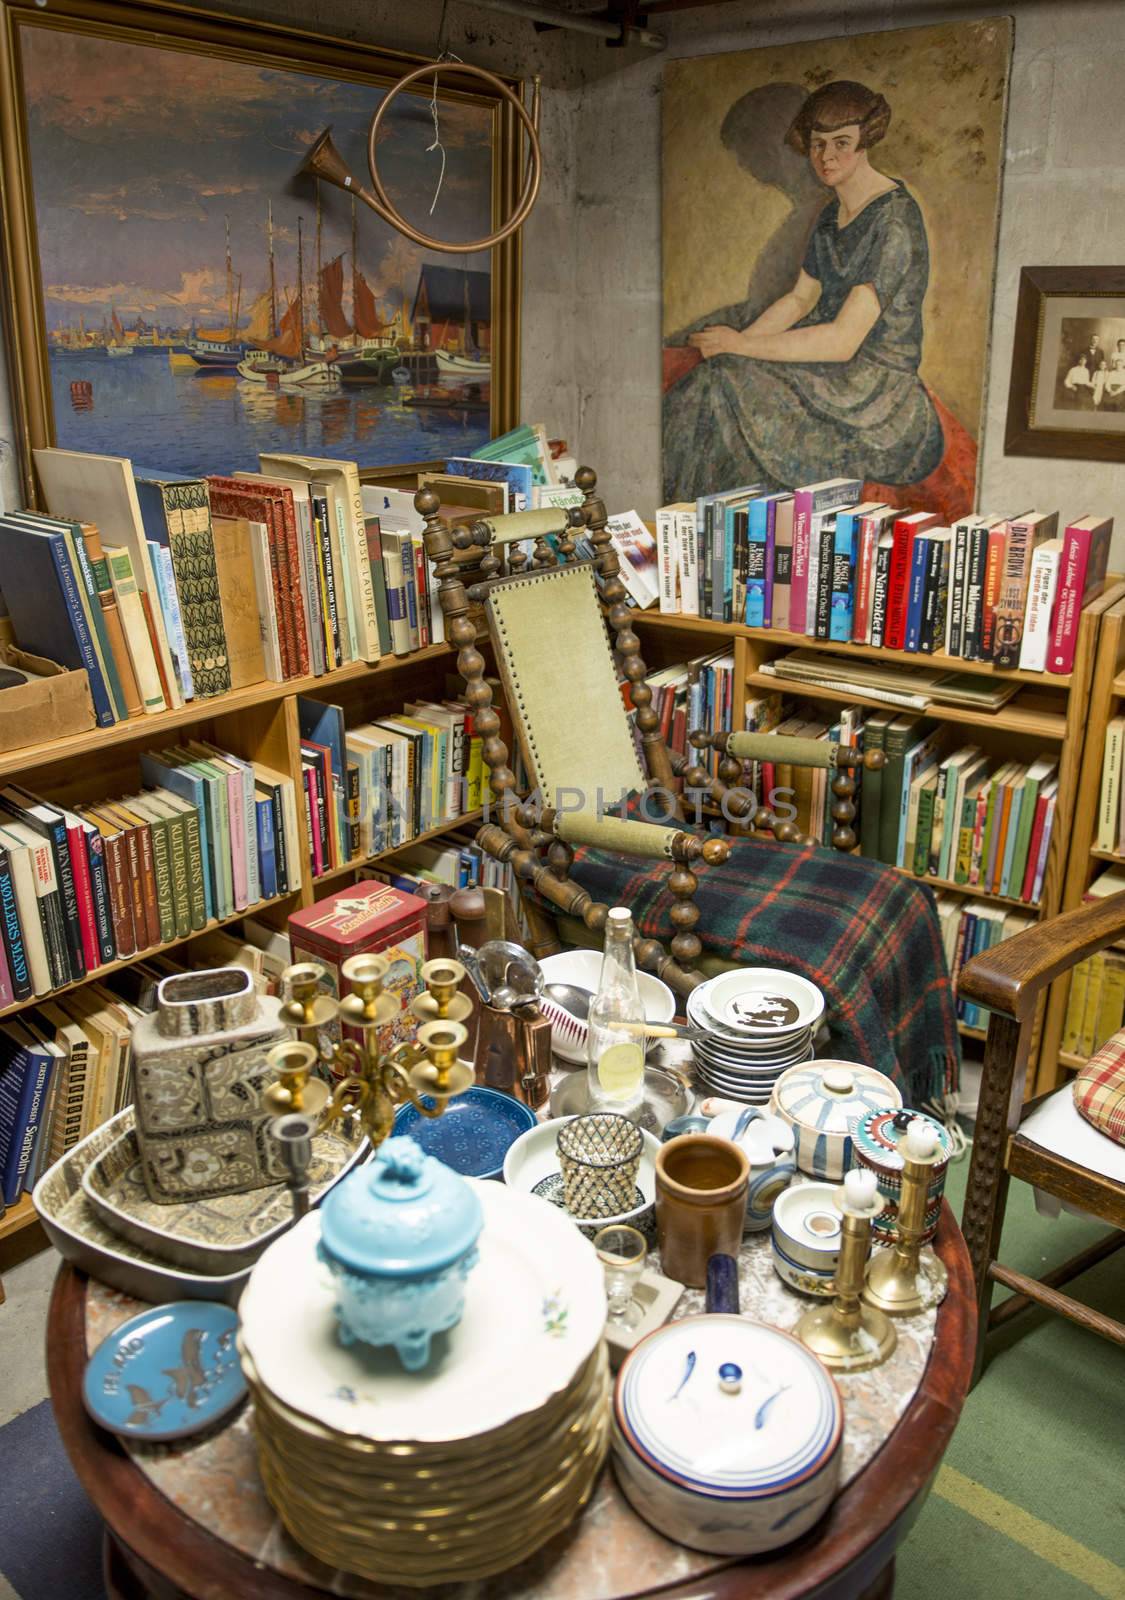 Traditional Antique shop in Denmark. Ceramics, books, pictures and chairs.